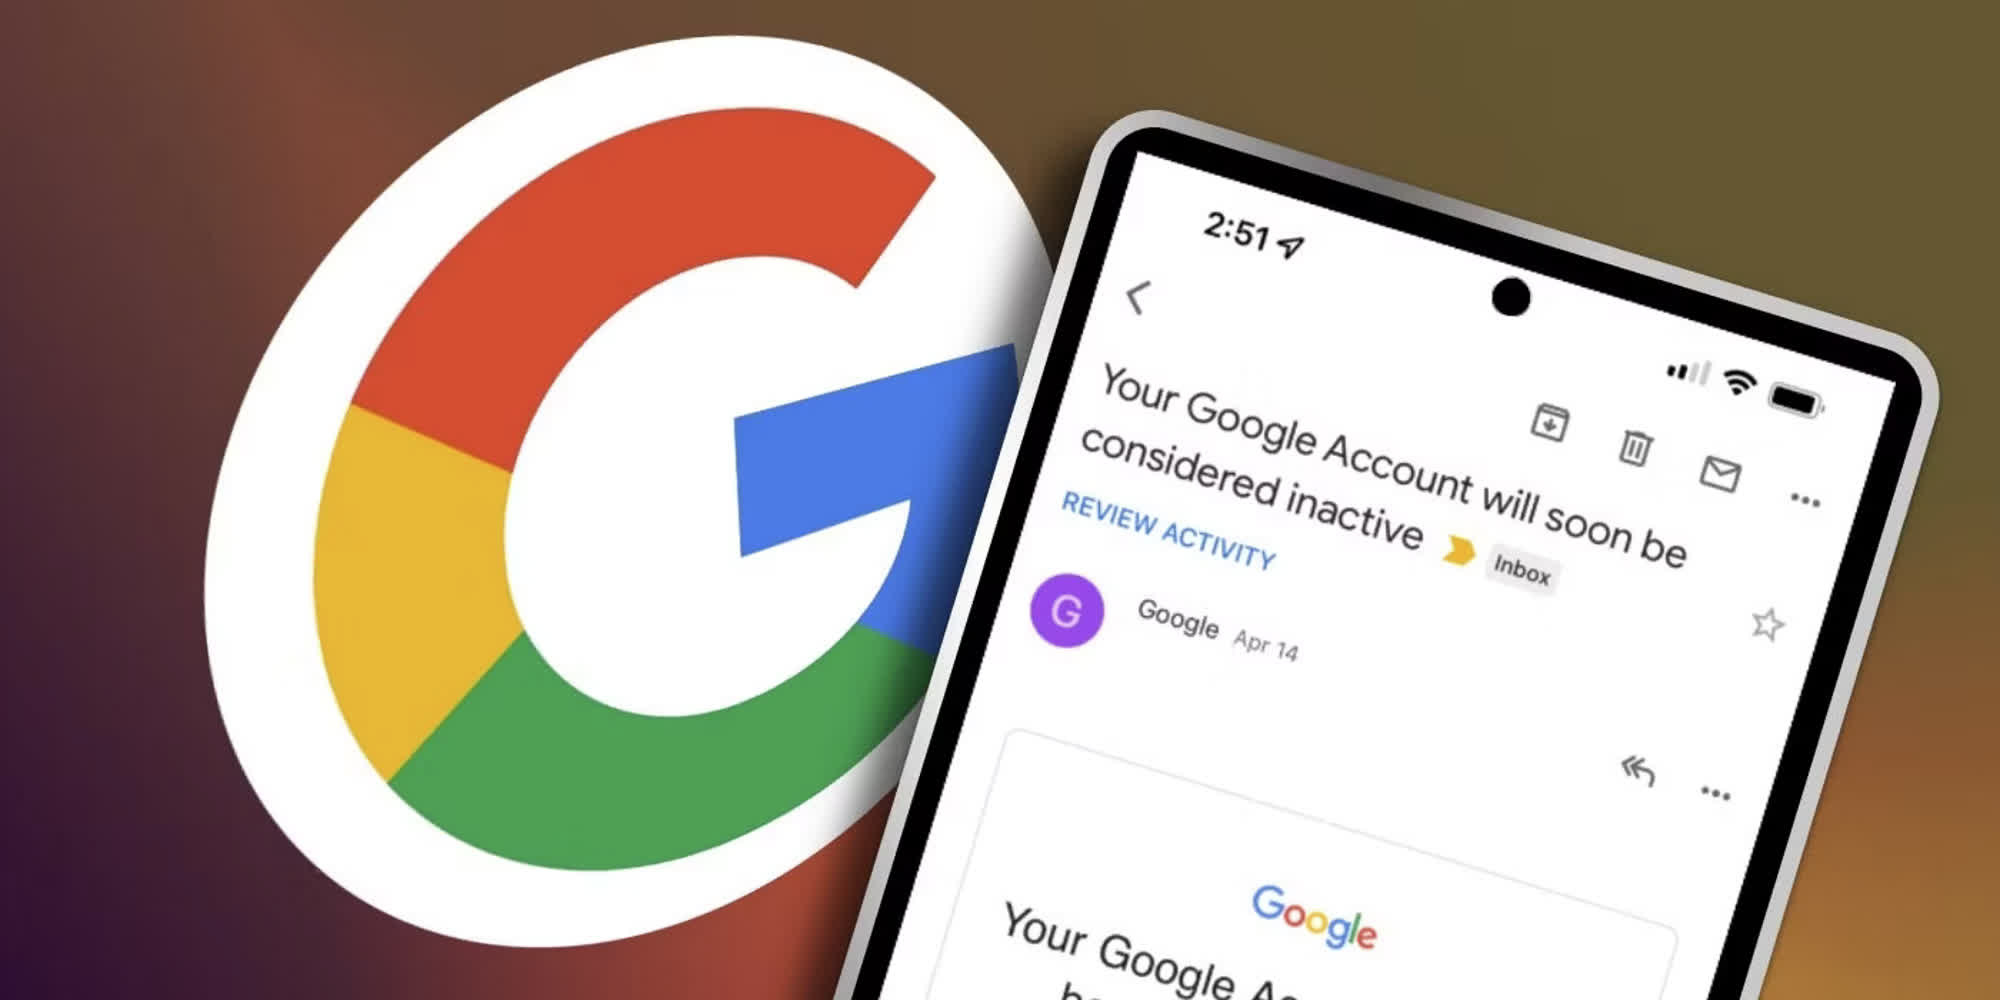 Inactive Gmail accounts will be deleted by Google starting December 1